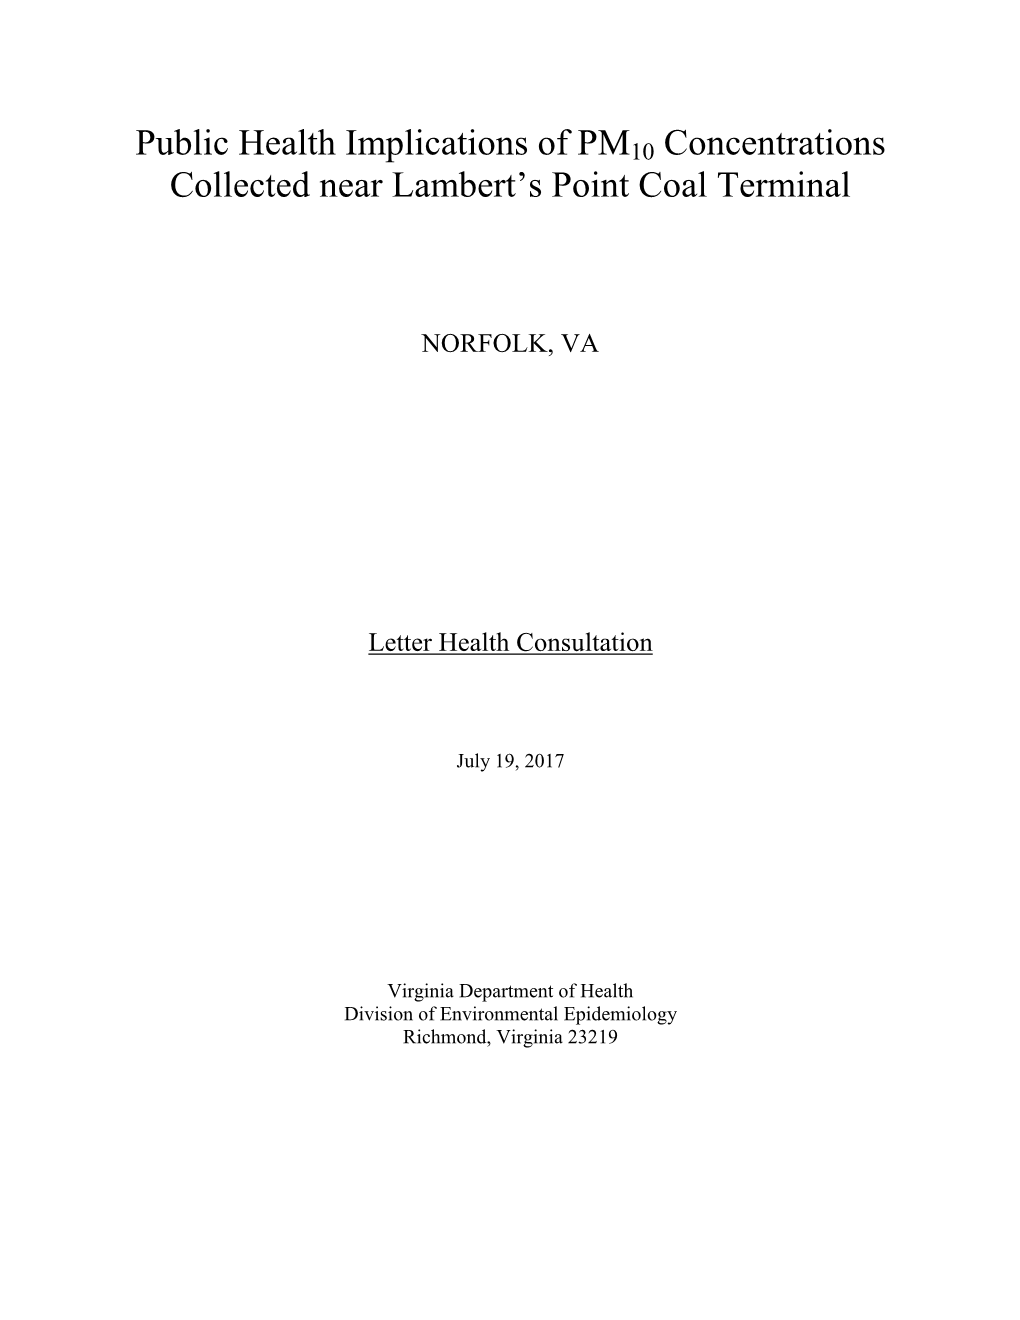 Public Health Implications of PM10 Concentrations Collected Near Lambert’S Point Coal Terminal